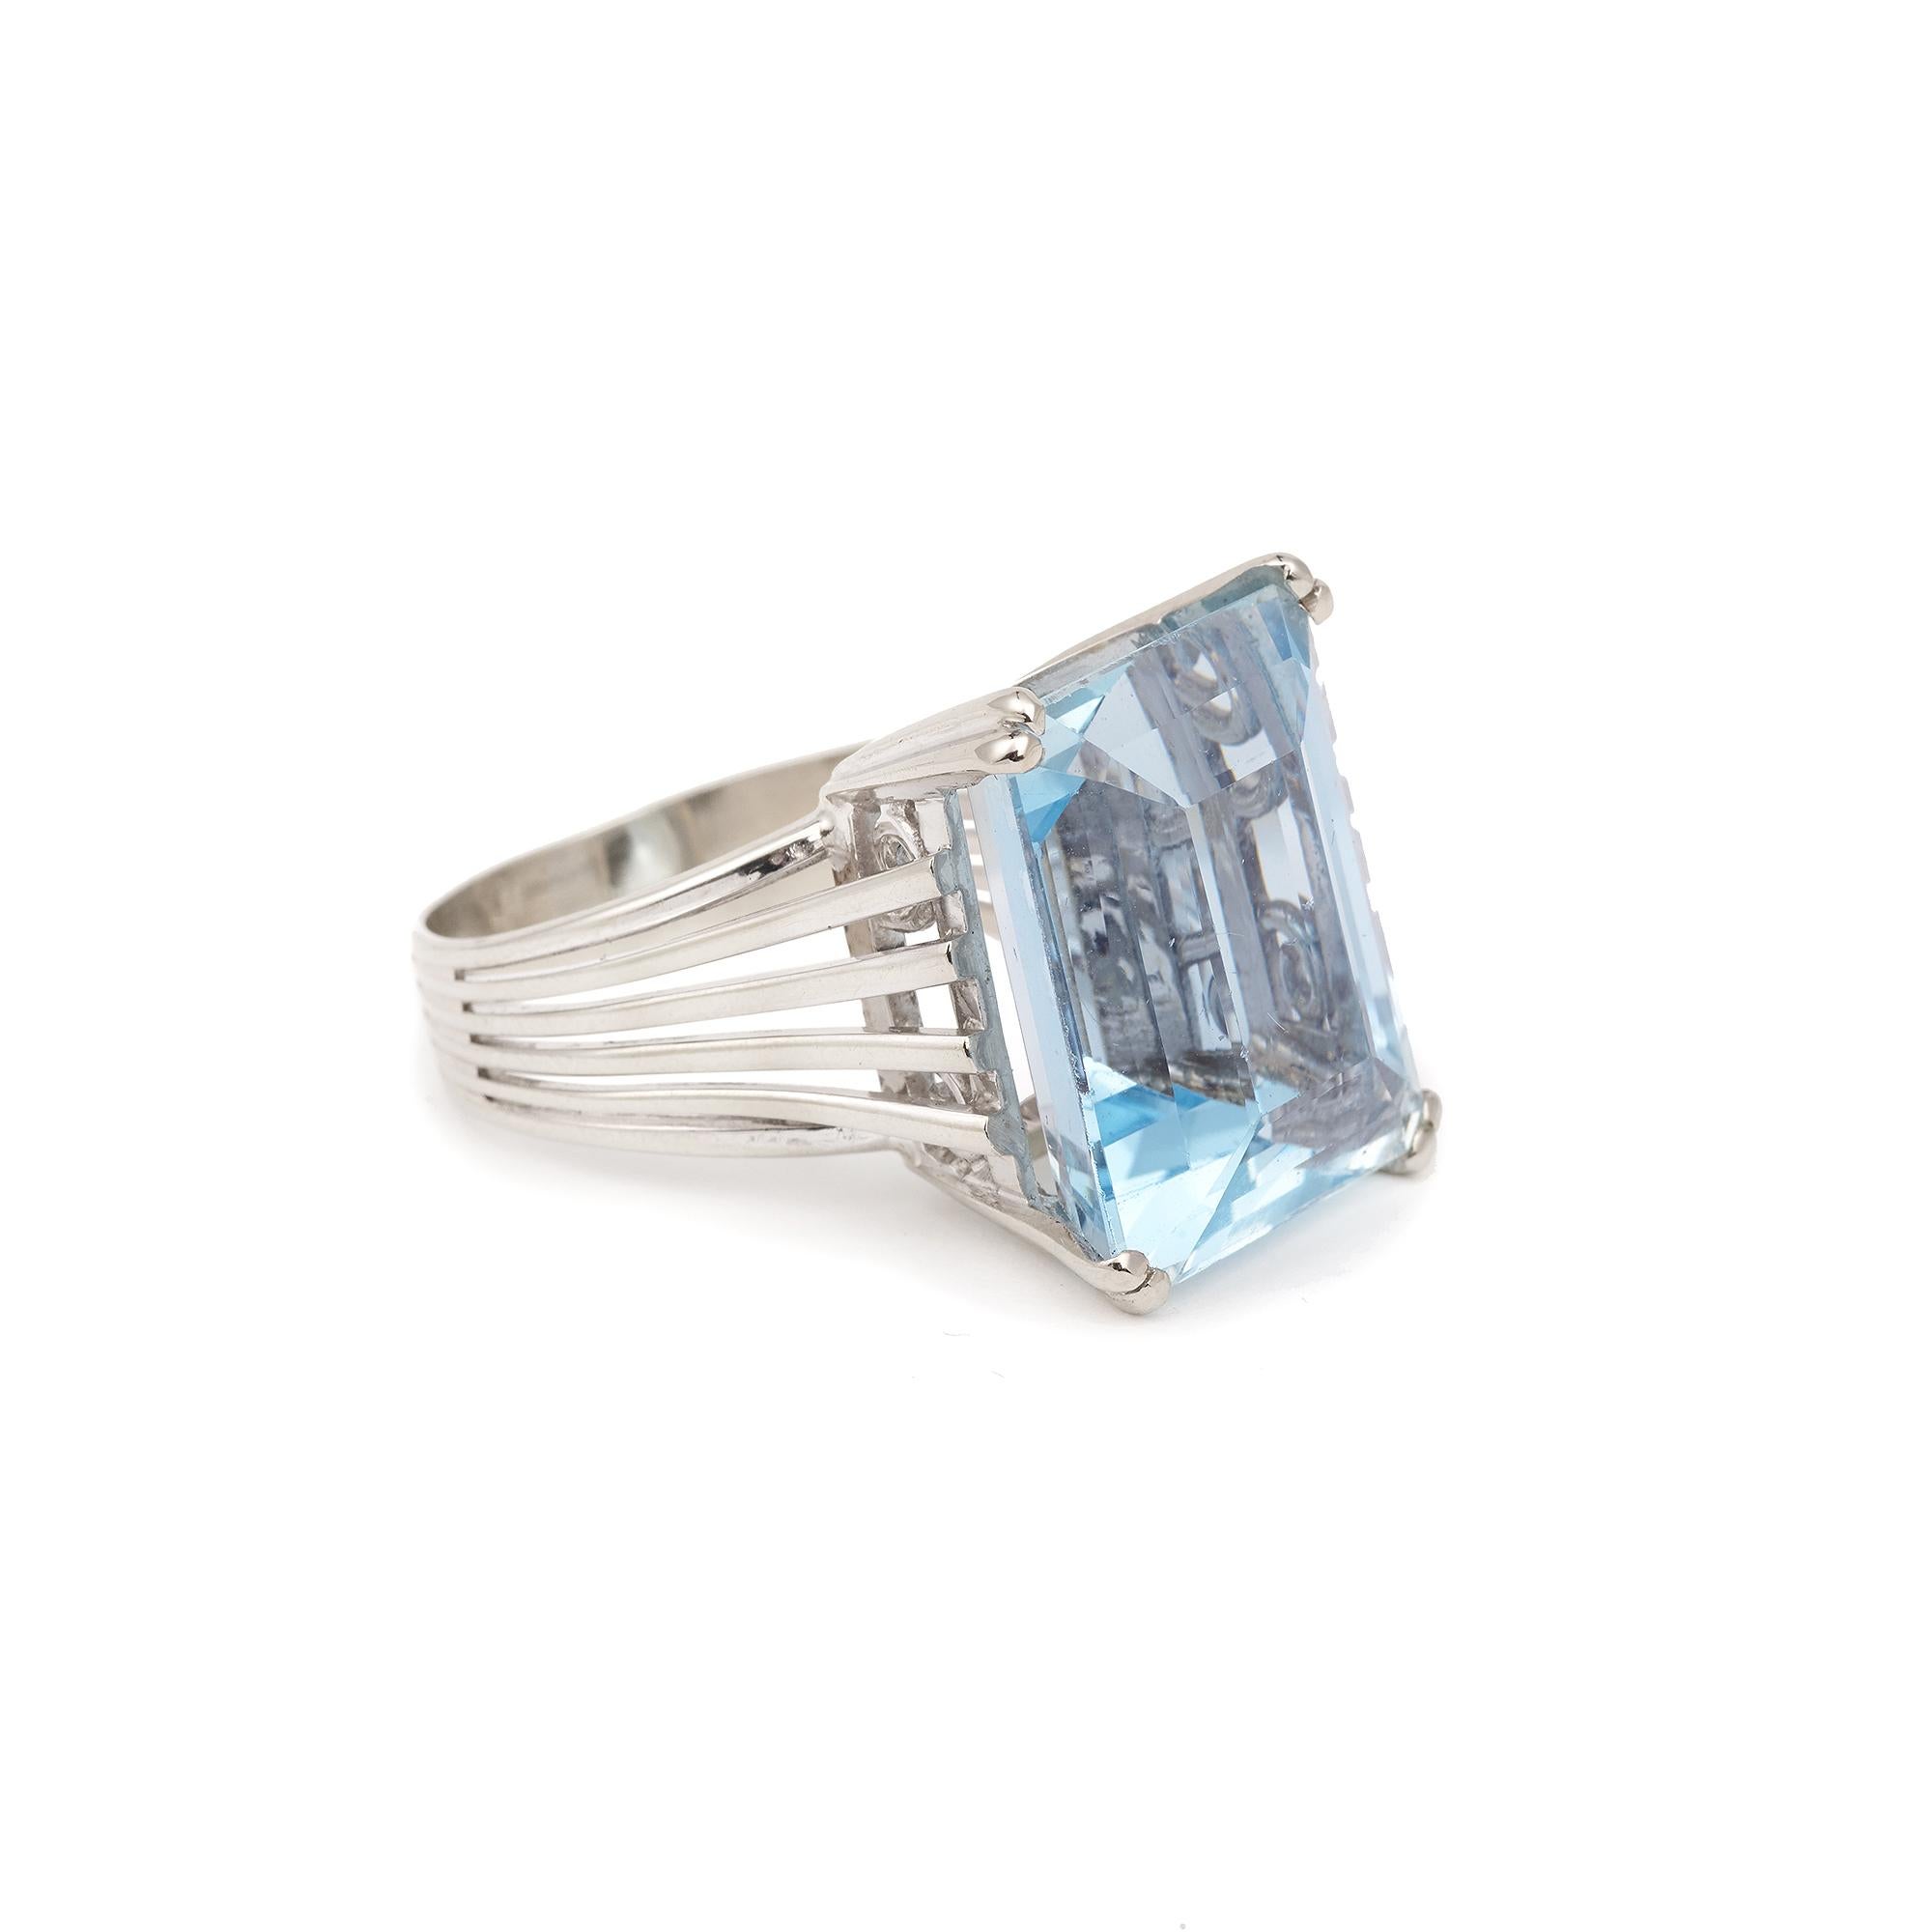 Vintage white gold ring set with a large faceted aquamarine in a emerald cut rectangular shape sides in claw setting.

Weight of the aquamarine: about 16 carats (the gemstone being set).

Dimensions of the ring 19.2 × 16 × 12 mm / 0,76 X 0,63 X 0,47